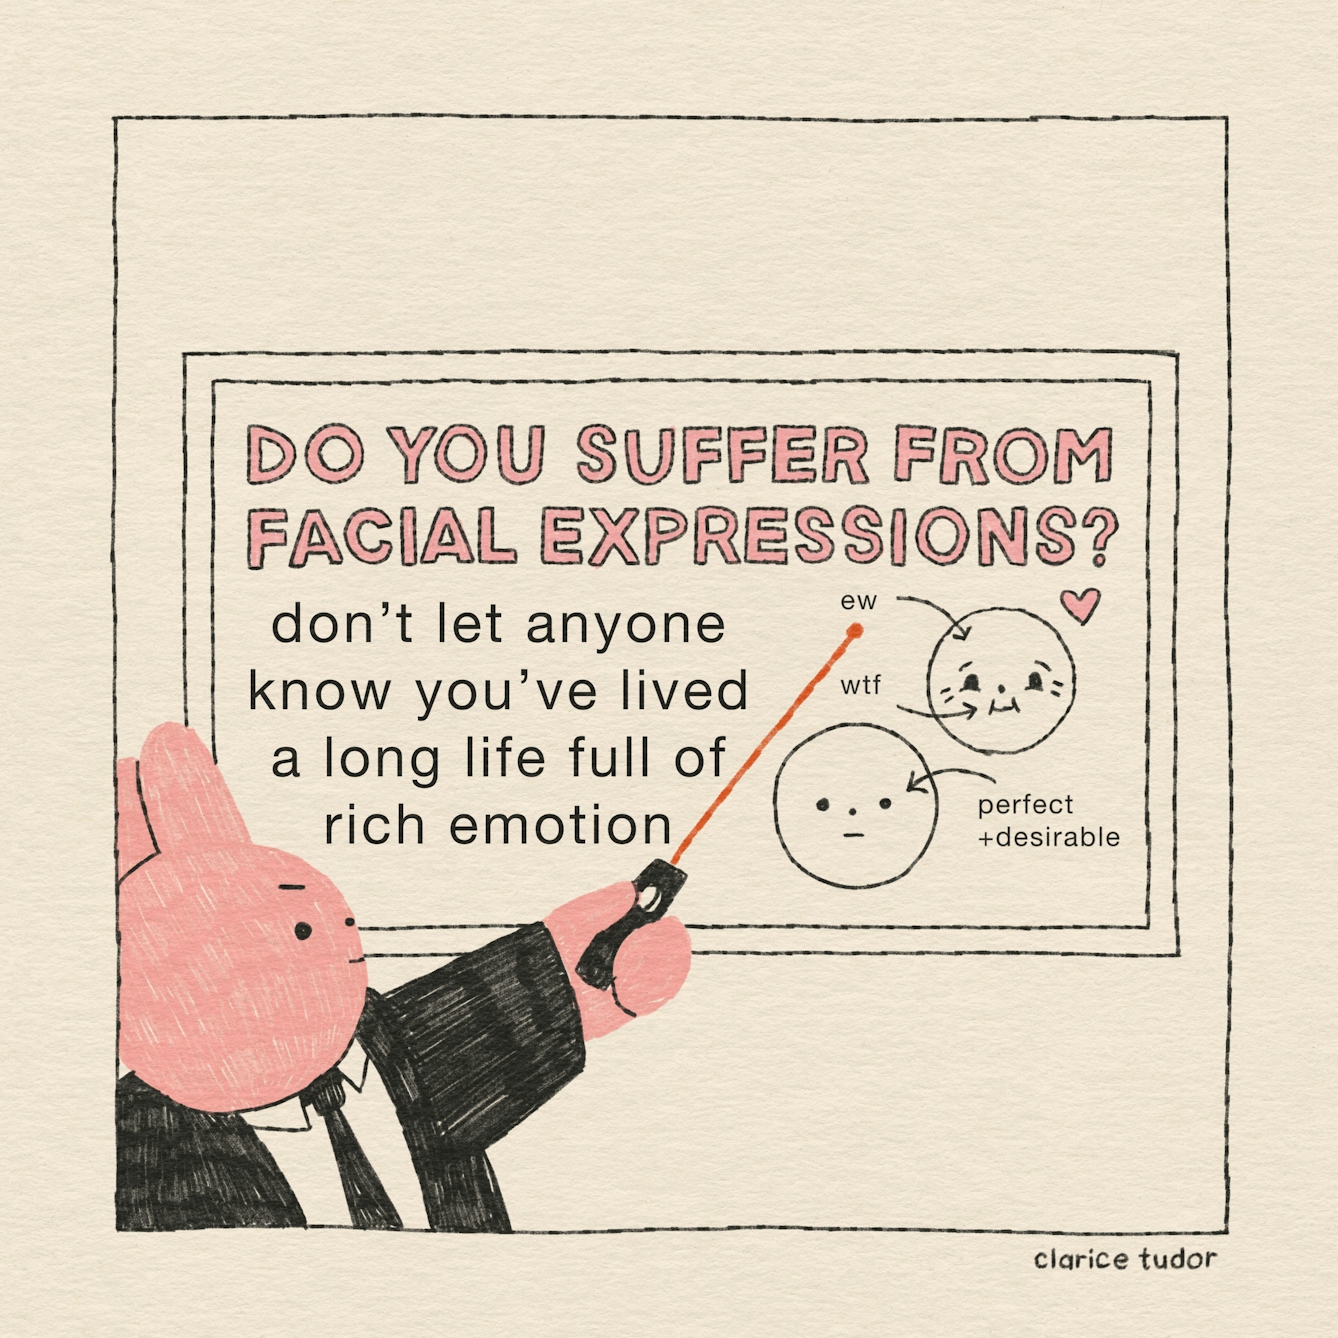 A pink rabbit in a black suit presents their idea for an advert on a billboard. It reads: “Do you suffer from facial expressions? Don’t let anyone know you’ve lived a long life full of rich emotion.” There are two faces on this advert: One is a smiling face with laugh lines. There are arrows pointing towards it saying ‘ew’ and ‘wtf’. There is another face with no emotion and no wrinkles. An arrow pointing towards it says: ‘perfect + desirable’. 